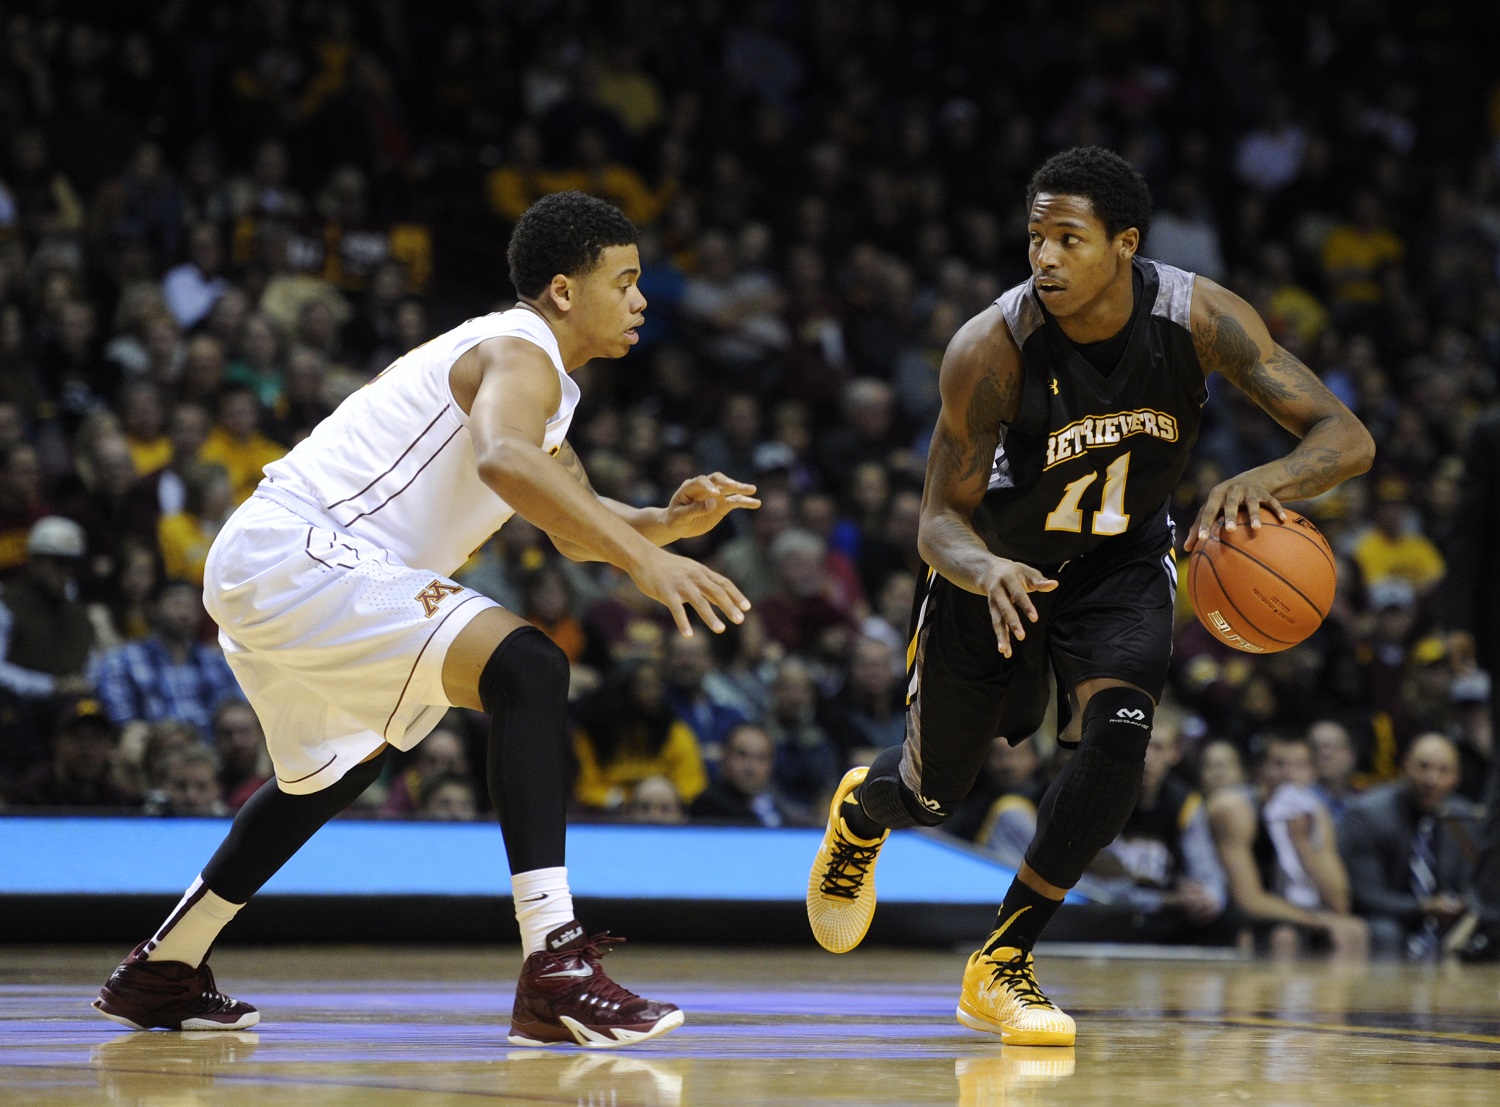 Minnesota guard Nate Mason (2) defends against Maryland-Baltimore County guard/forward Charles Taylor (11) during the first half of an NCAA college basketball game Saturday, Nov. 22, 2014, in Minneapolis. Minnesota won 69-51. (AP Photo/Hannah Foslien)